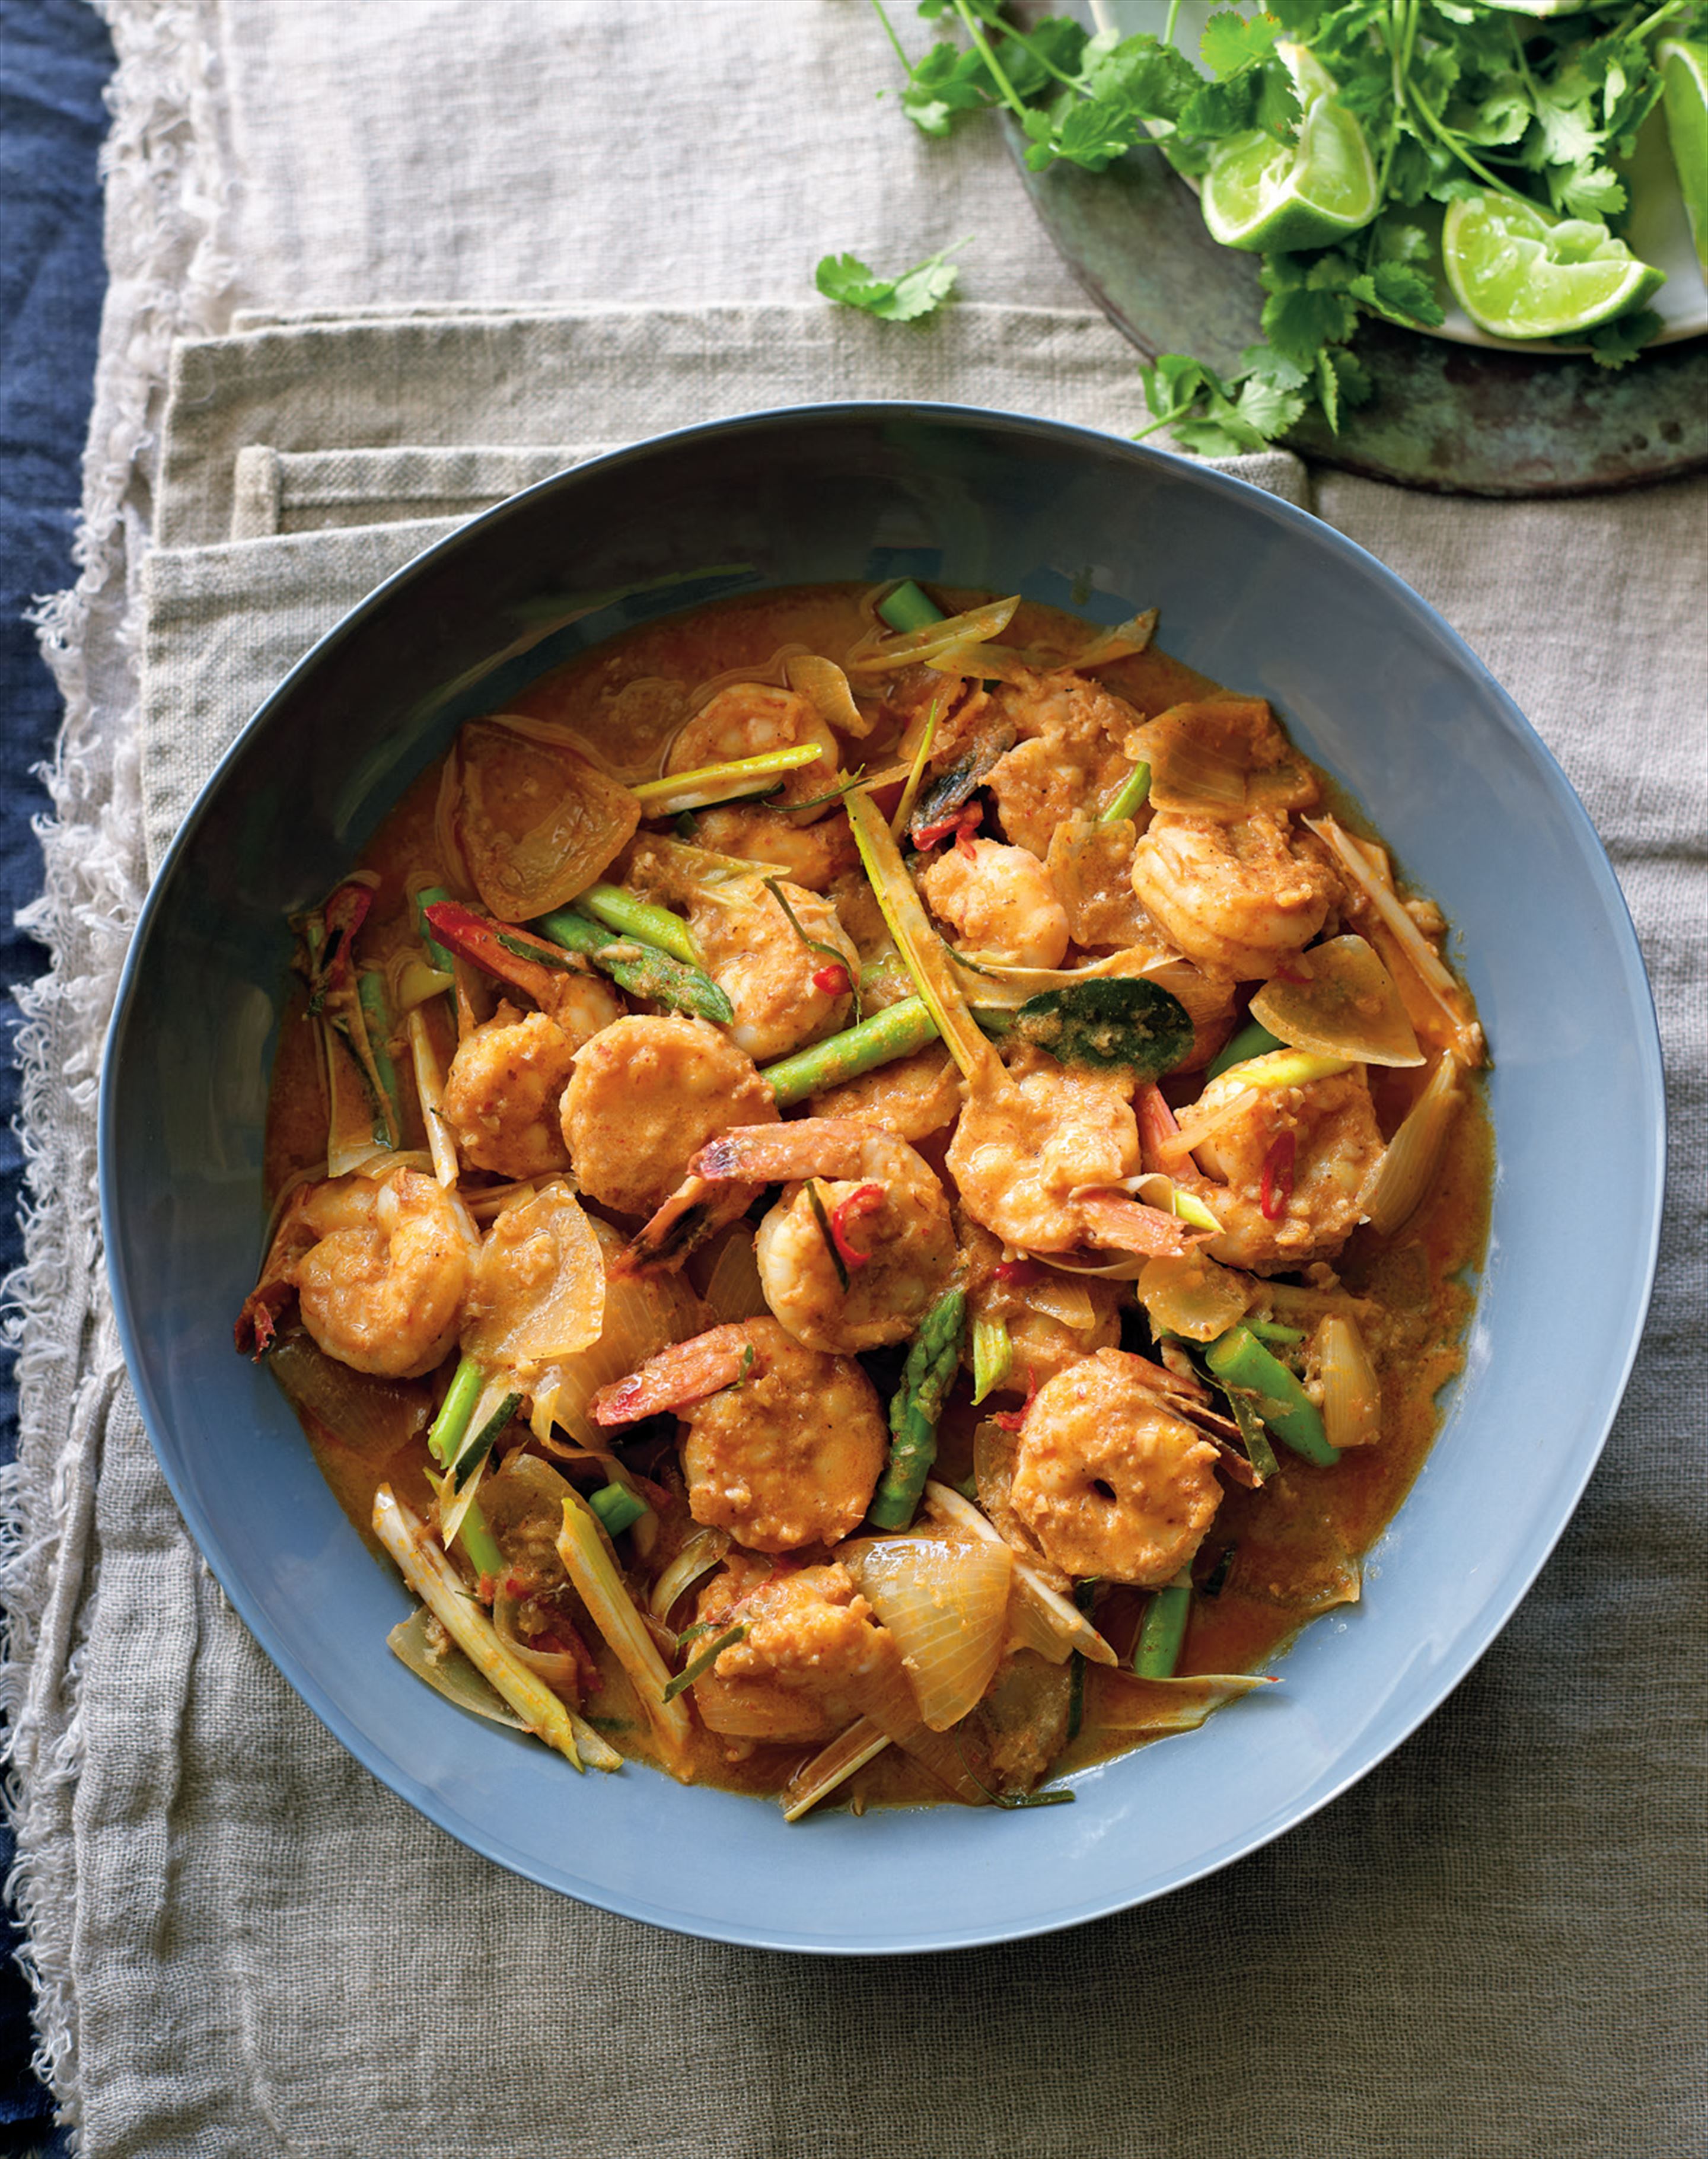 Prawn and asparagus red curry